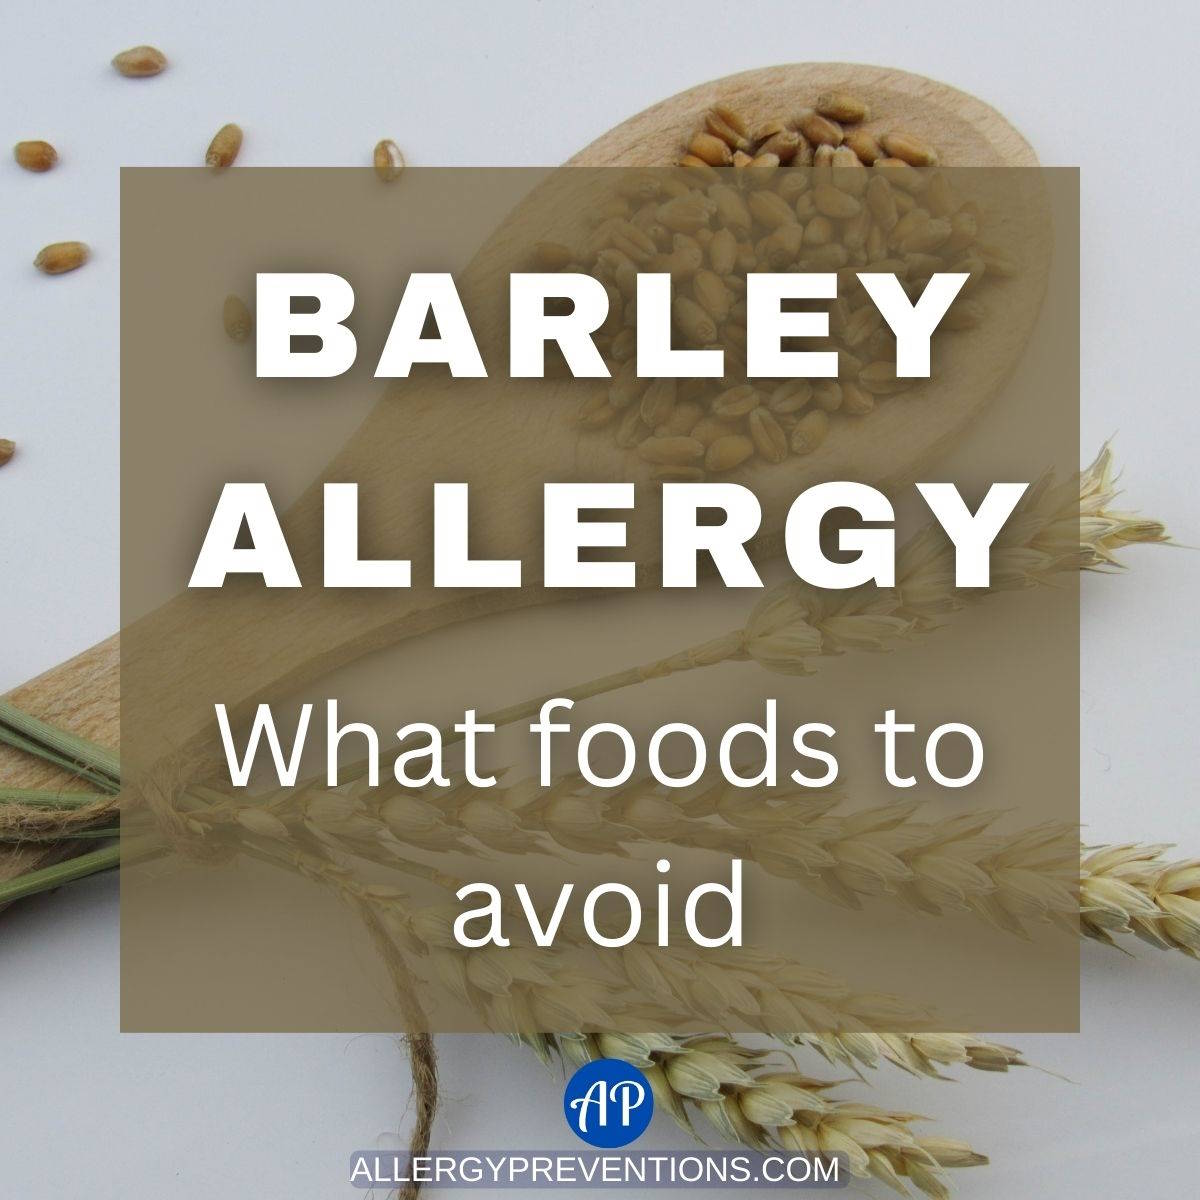 Barley Allergy: What Foods to Avoid